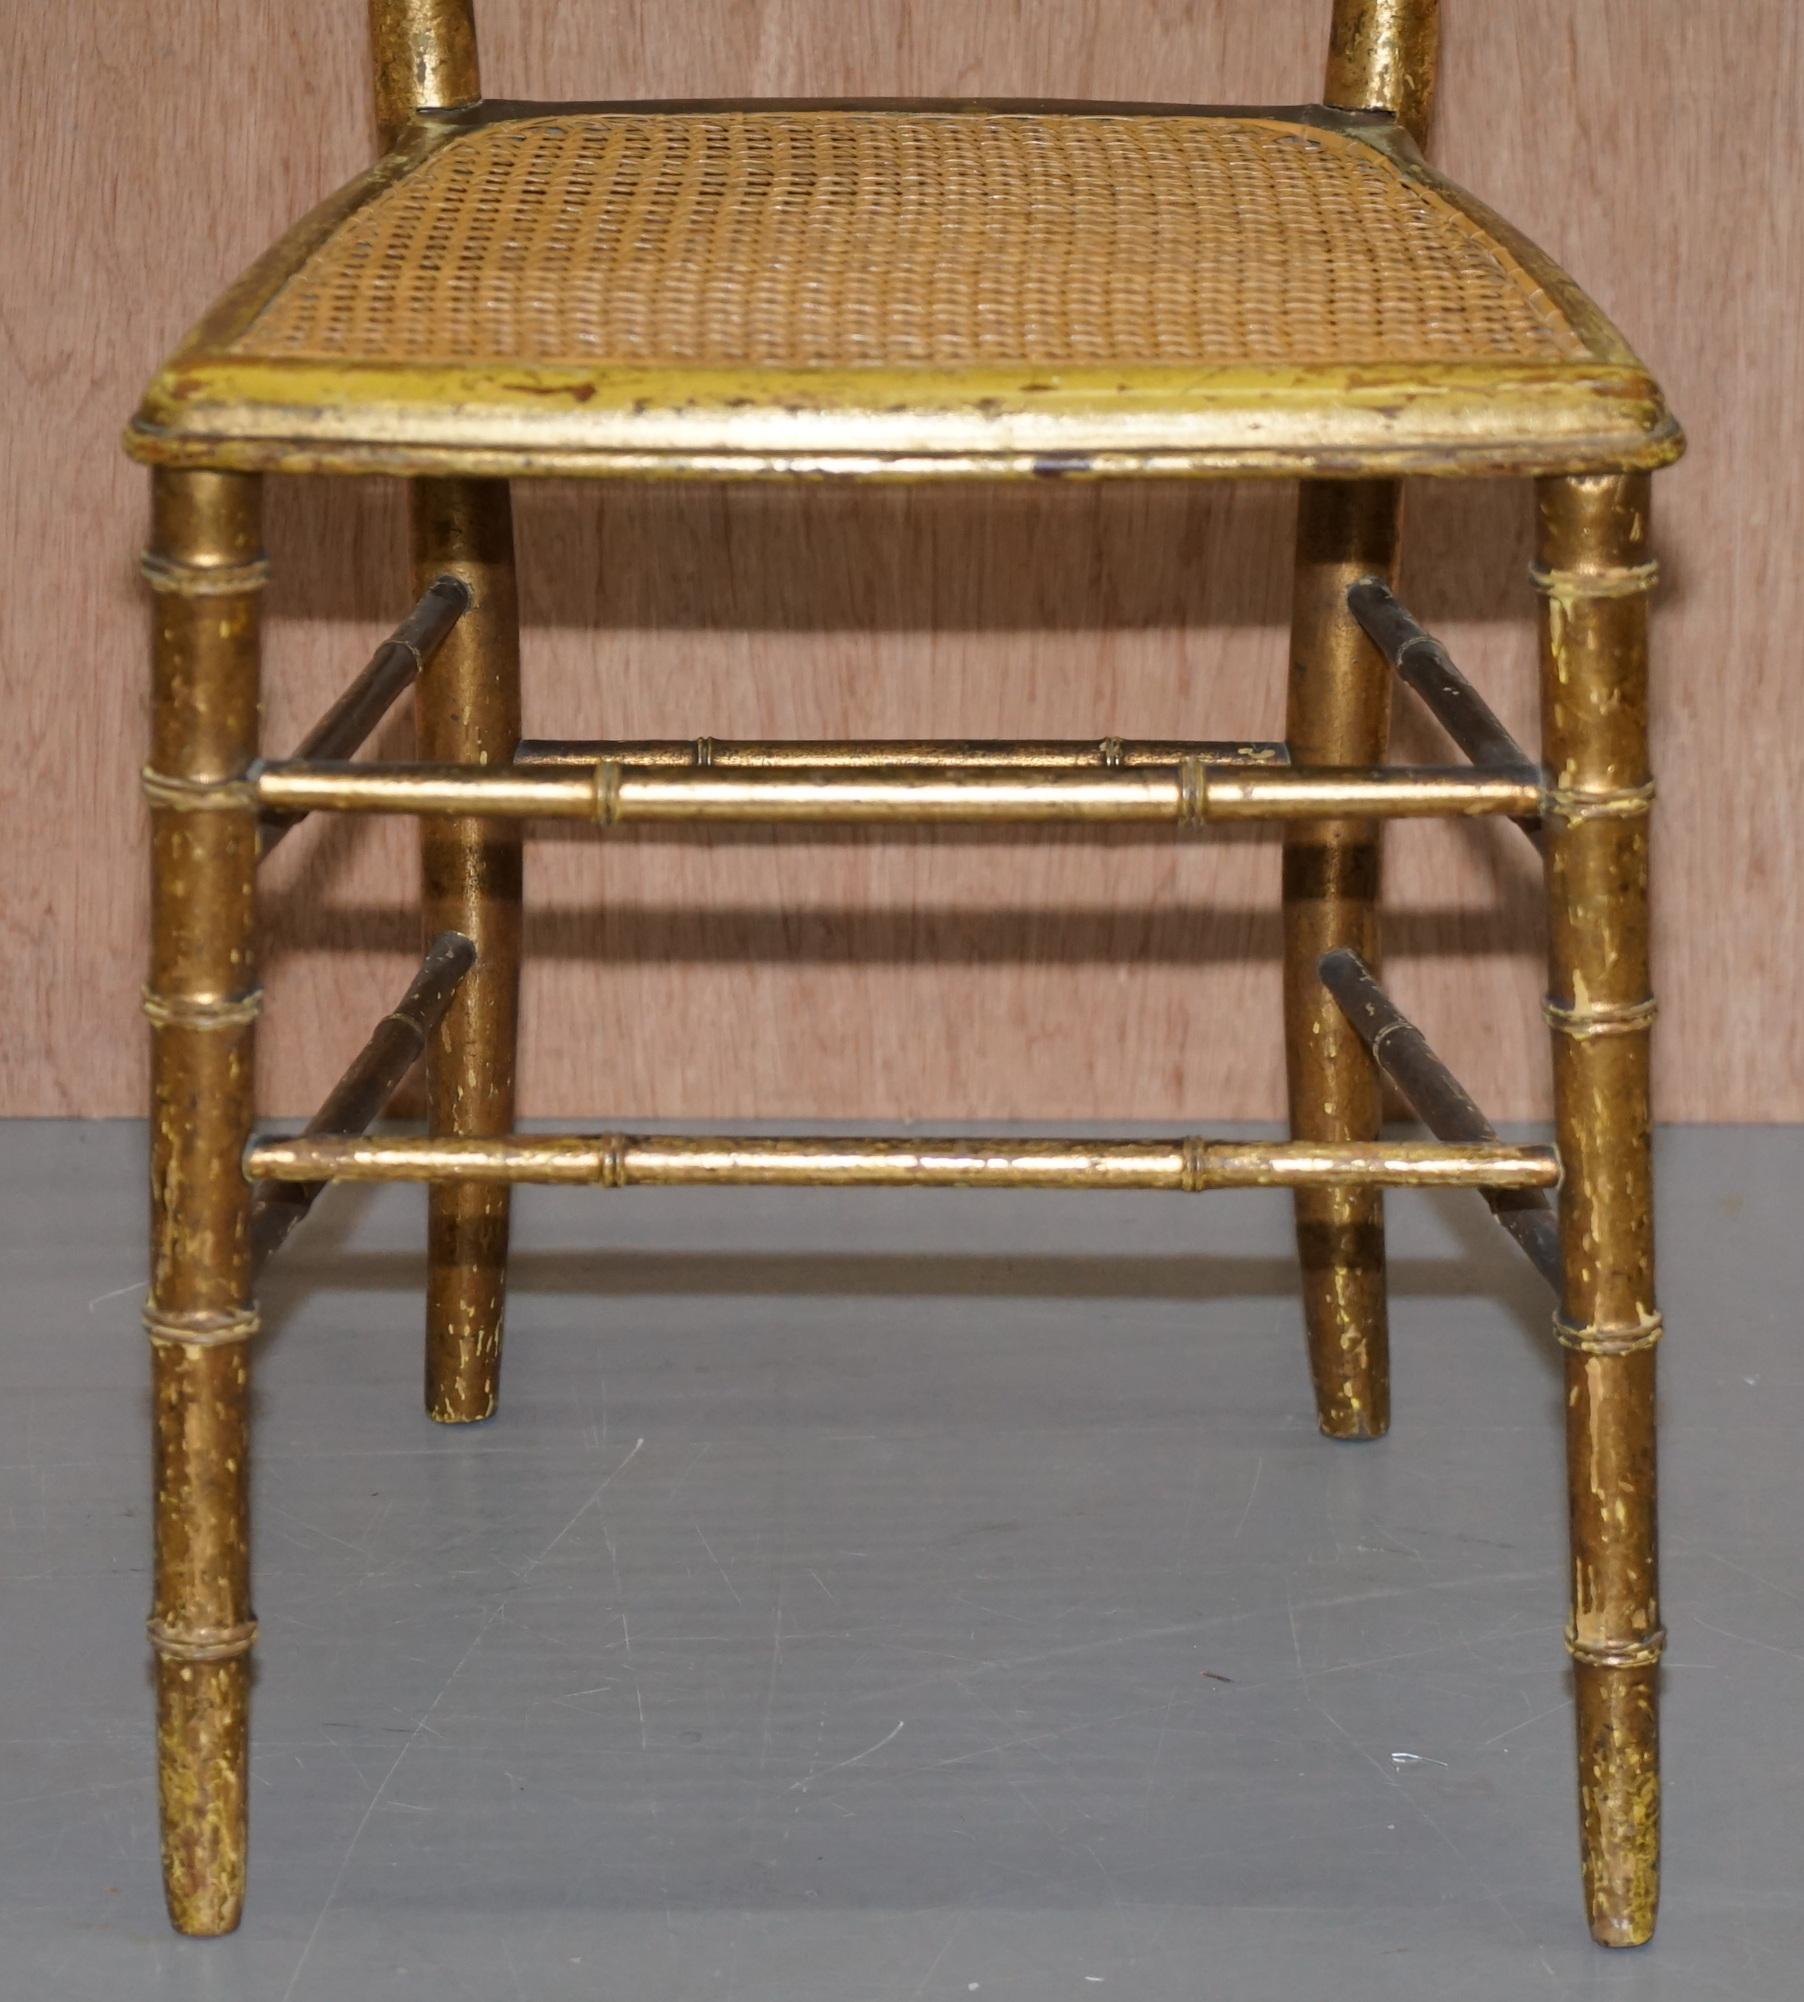 Pair of Original Giltwood Famboo Regency Bergere Chairs with Period Gold Gilding For Sale 3